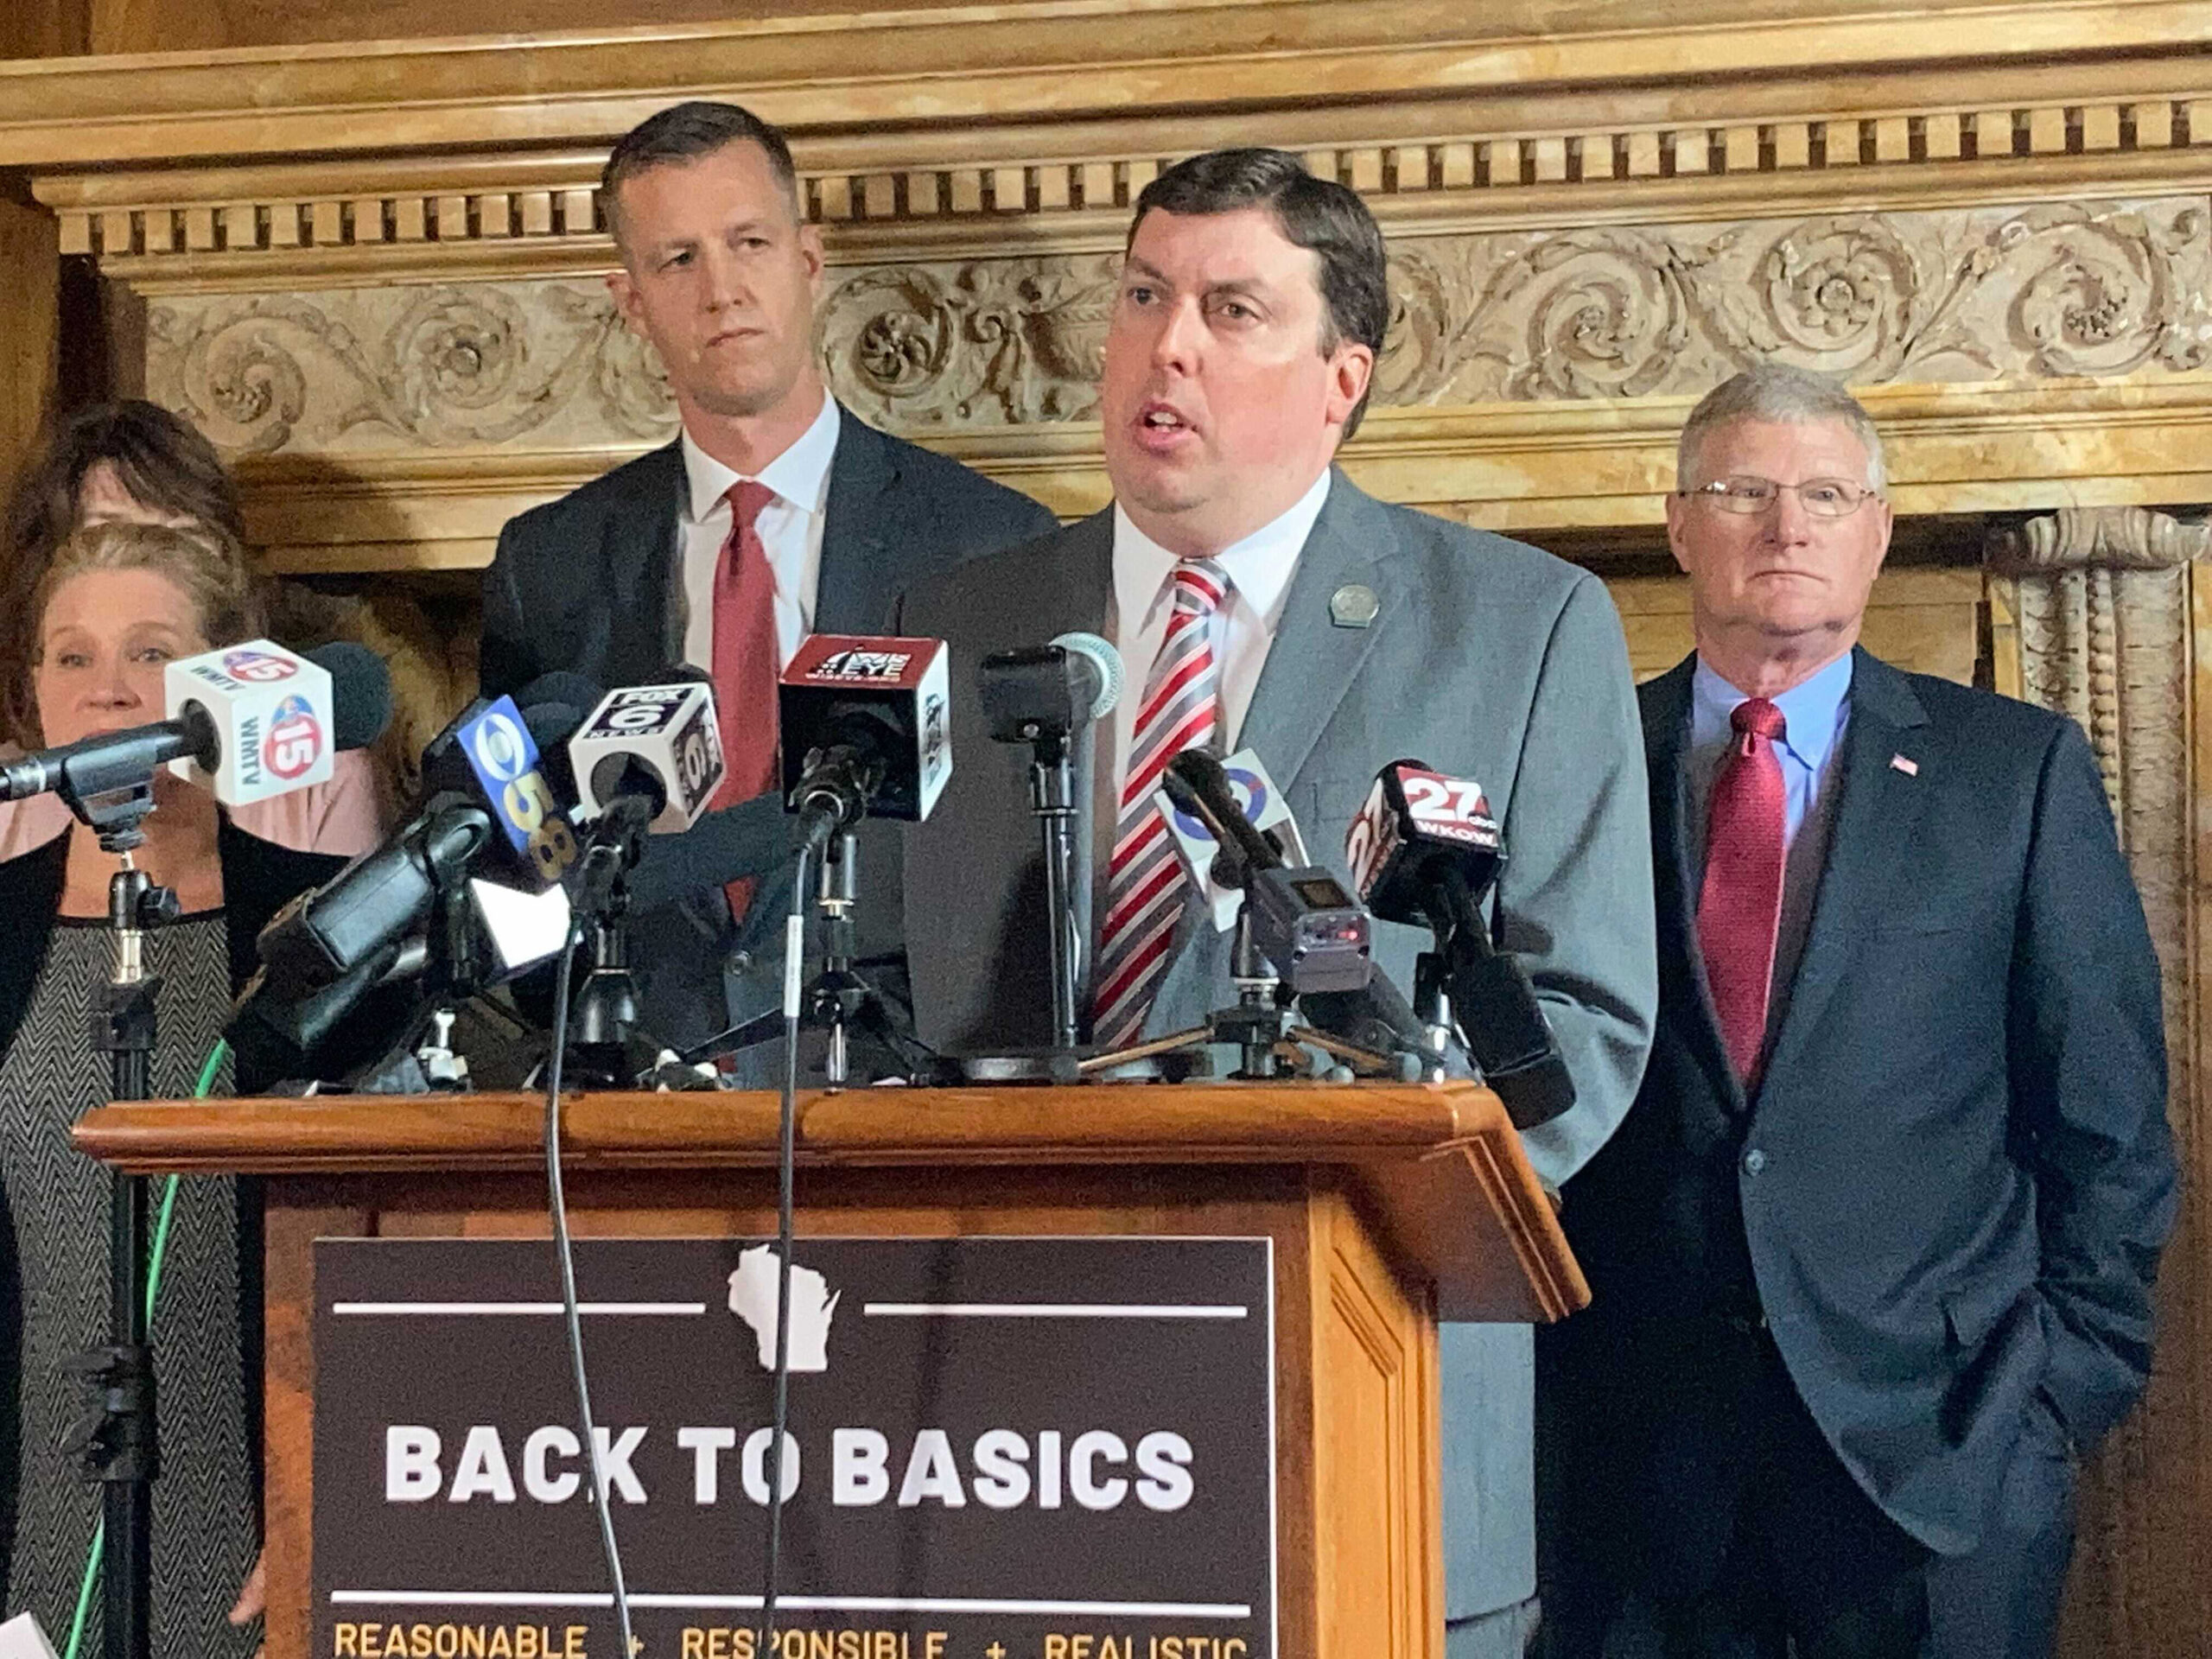 Wisconsin Republican law makers at a news conference